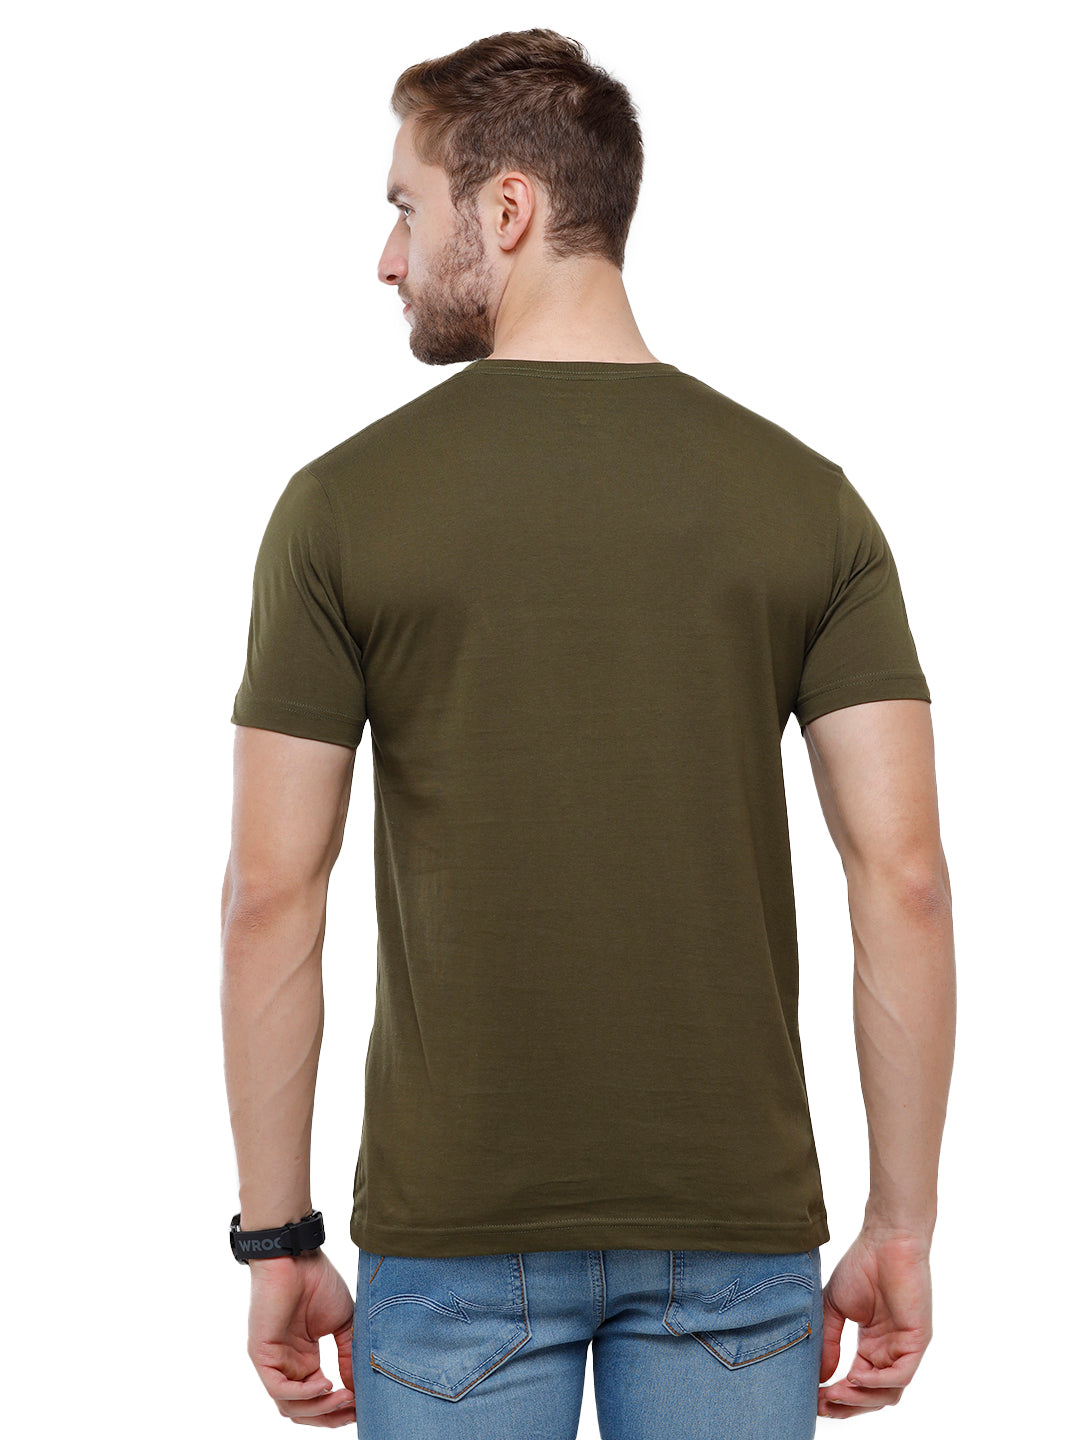 Classic Polo Men's Solid Single Jersey GreenHalf Sleeve Slim Fit T-Shirt - Kore-07 T-shirt Classic Polo 